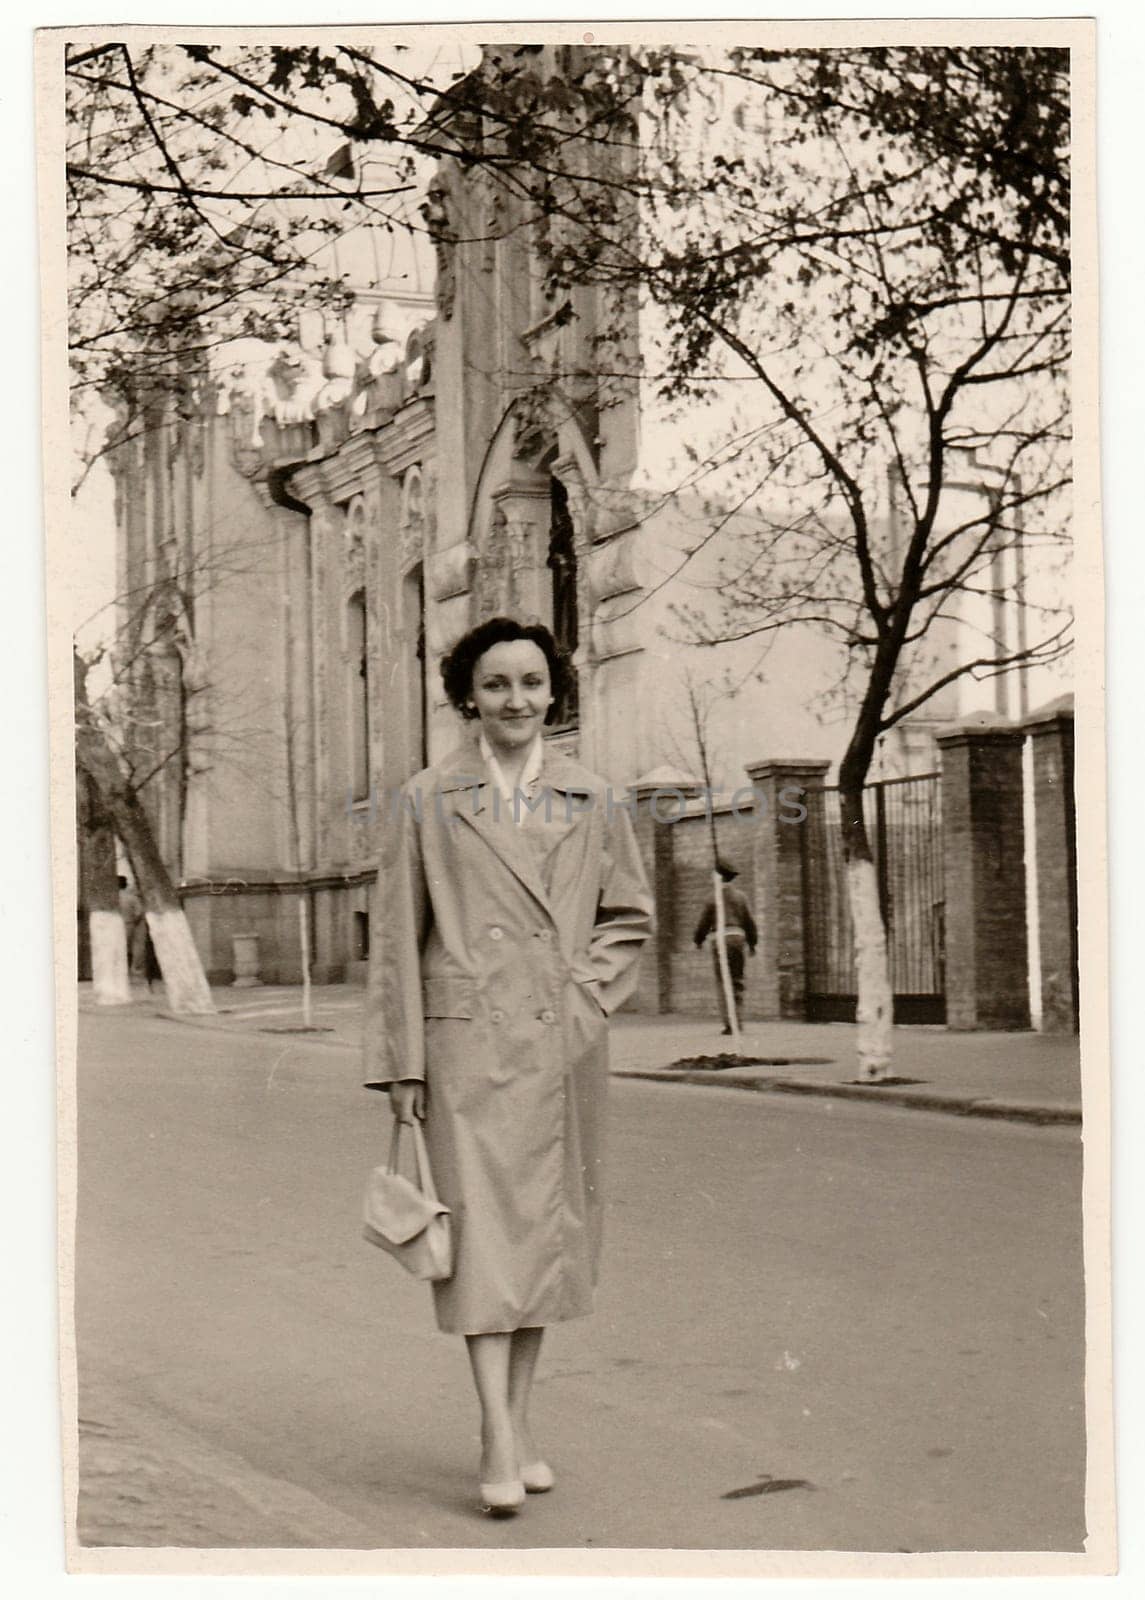 USSR - APRIL, 1961: Vintage photo shows a young pretty woman on the street in USSR.